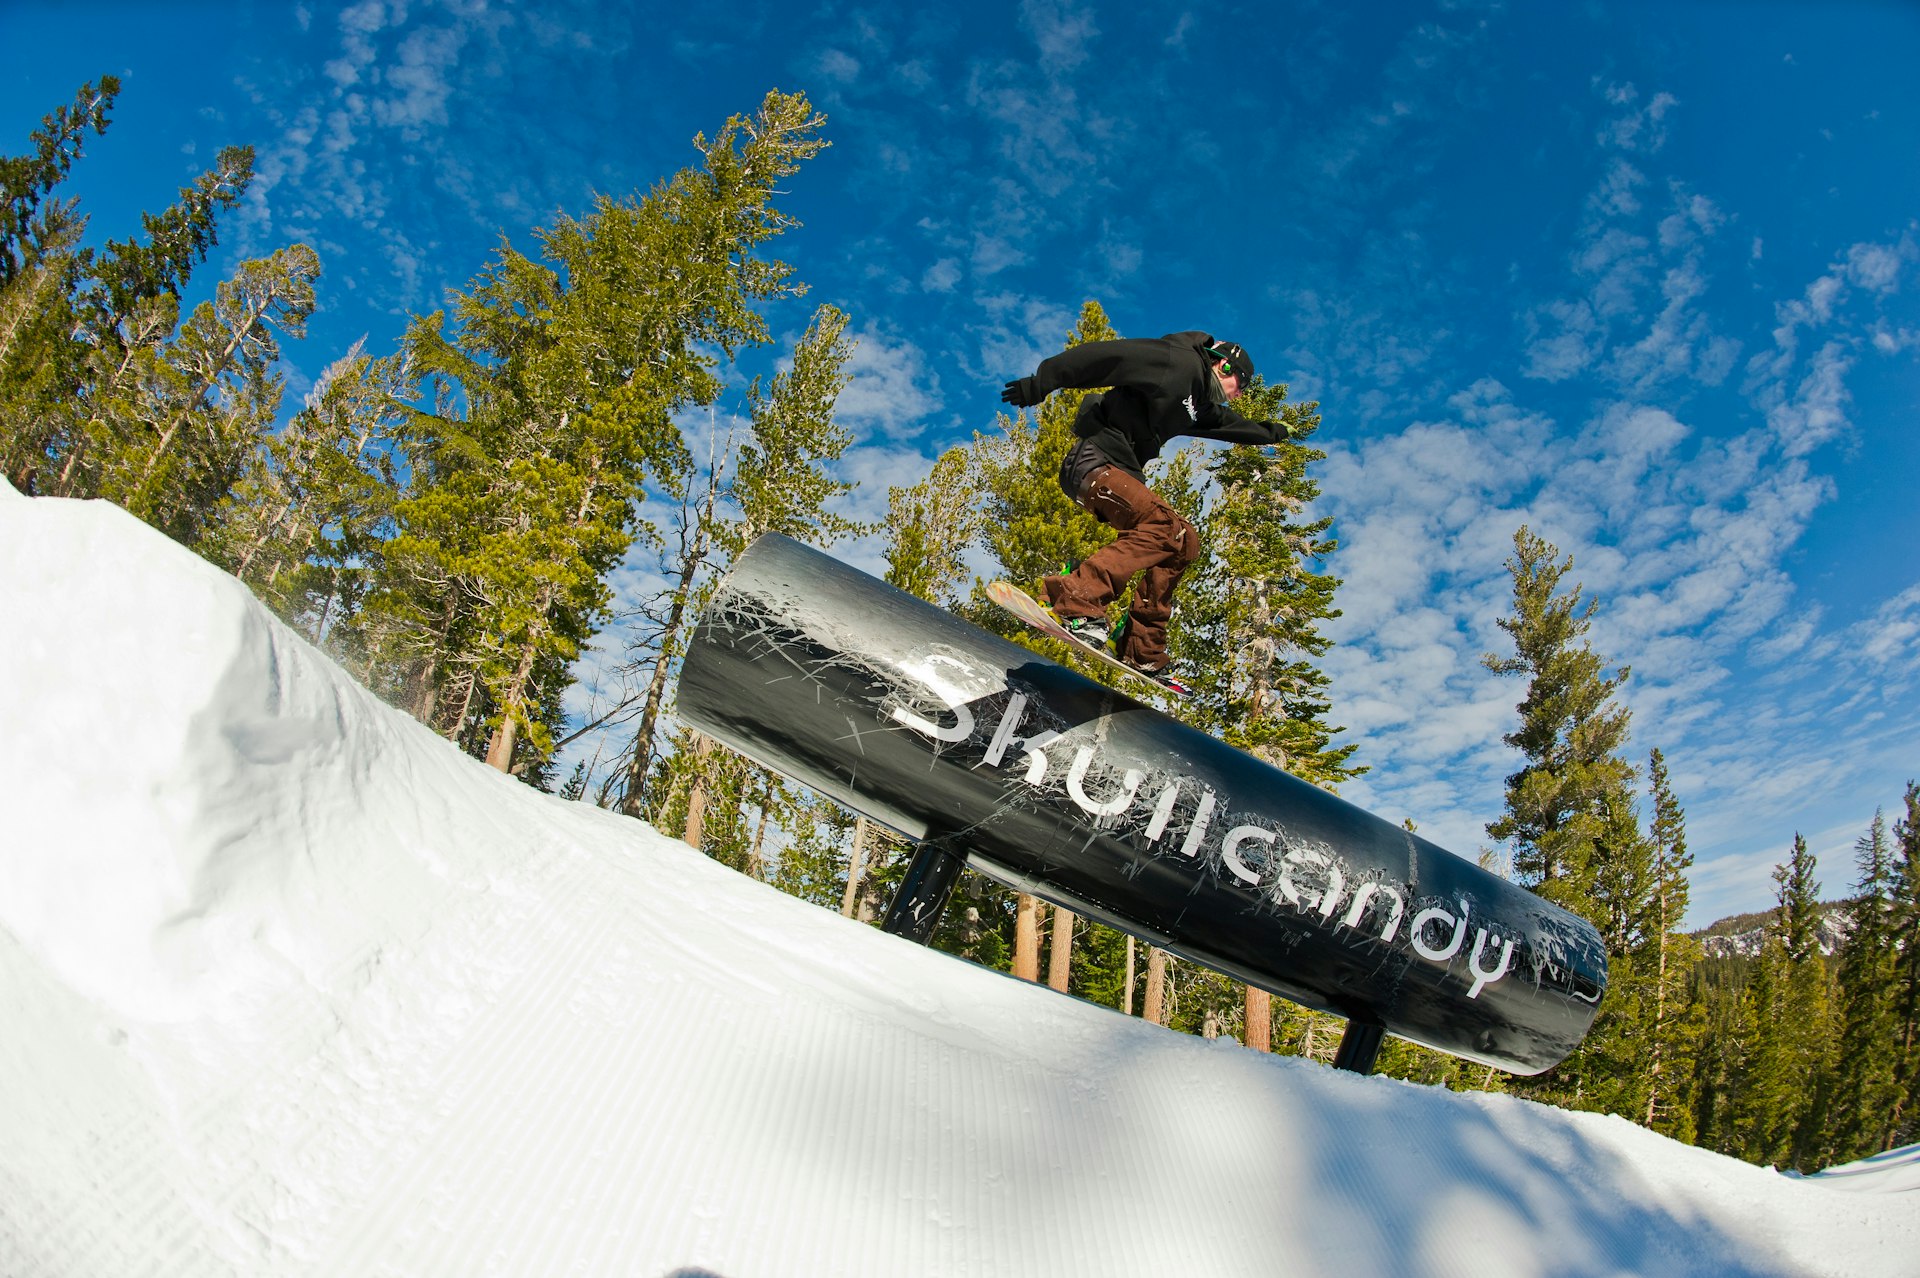 Mammoth Park is a snowboarder's paradise.